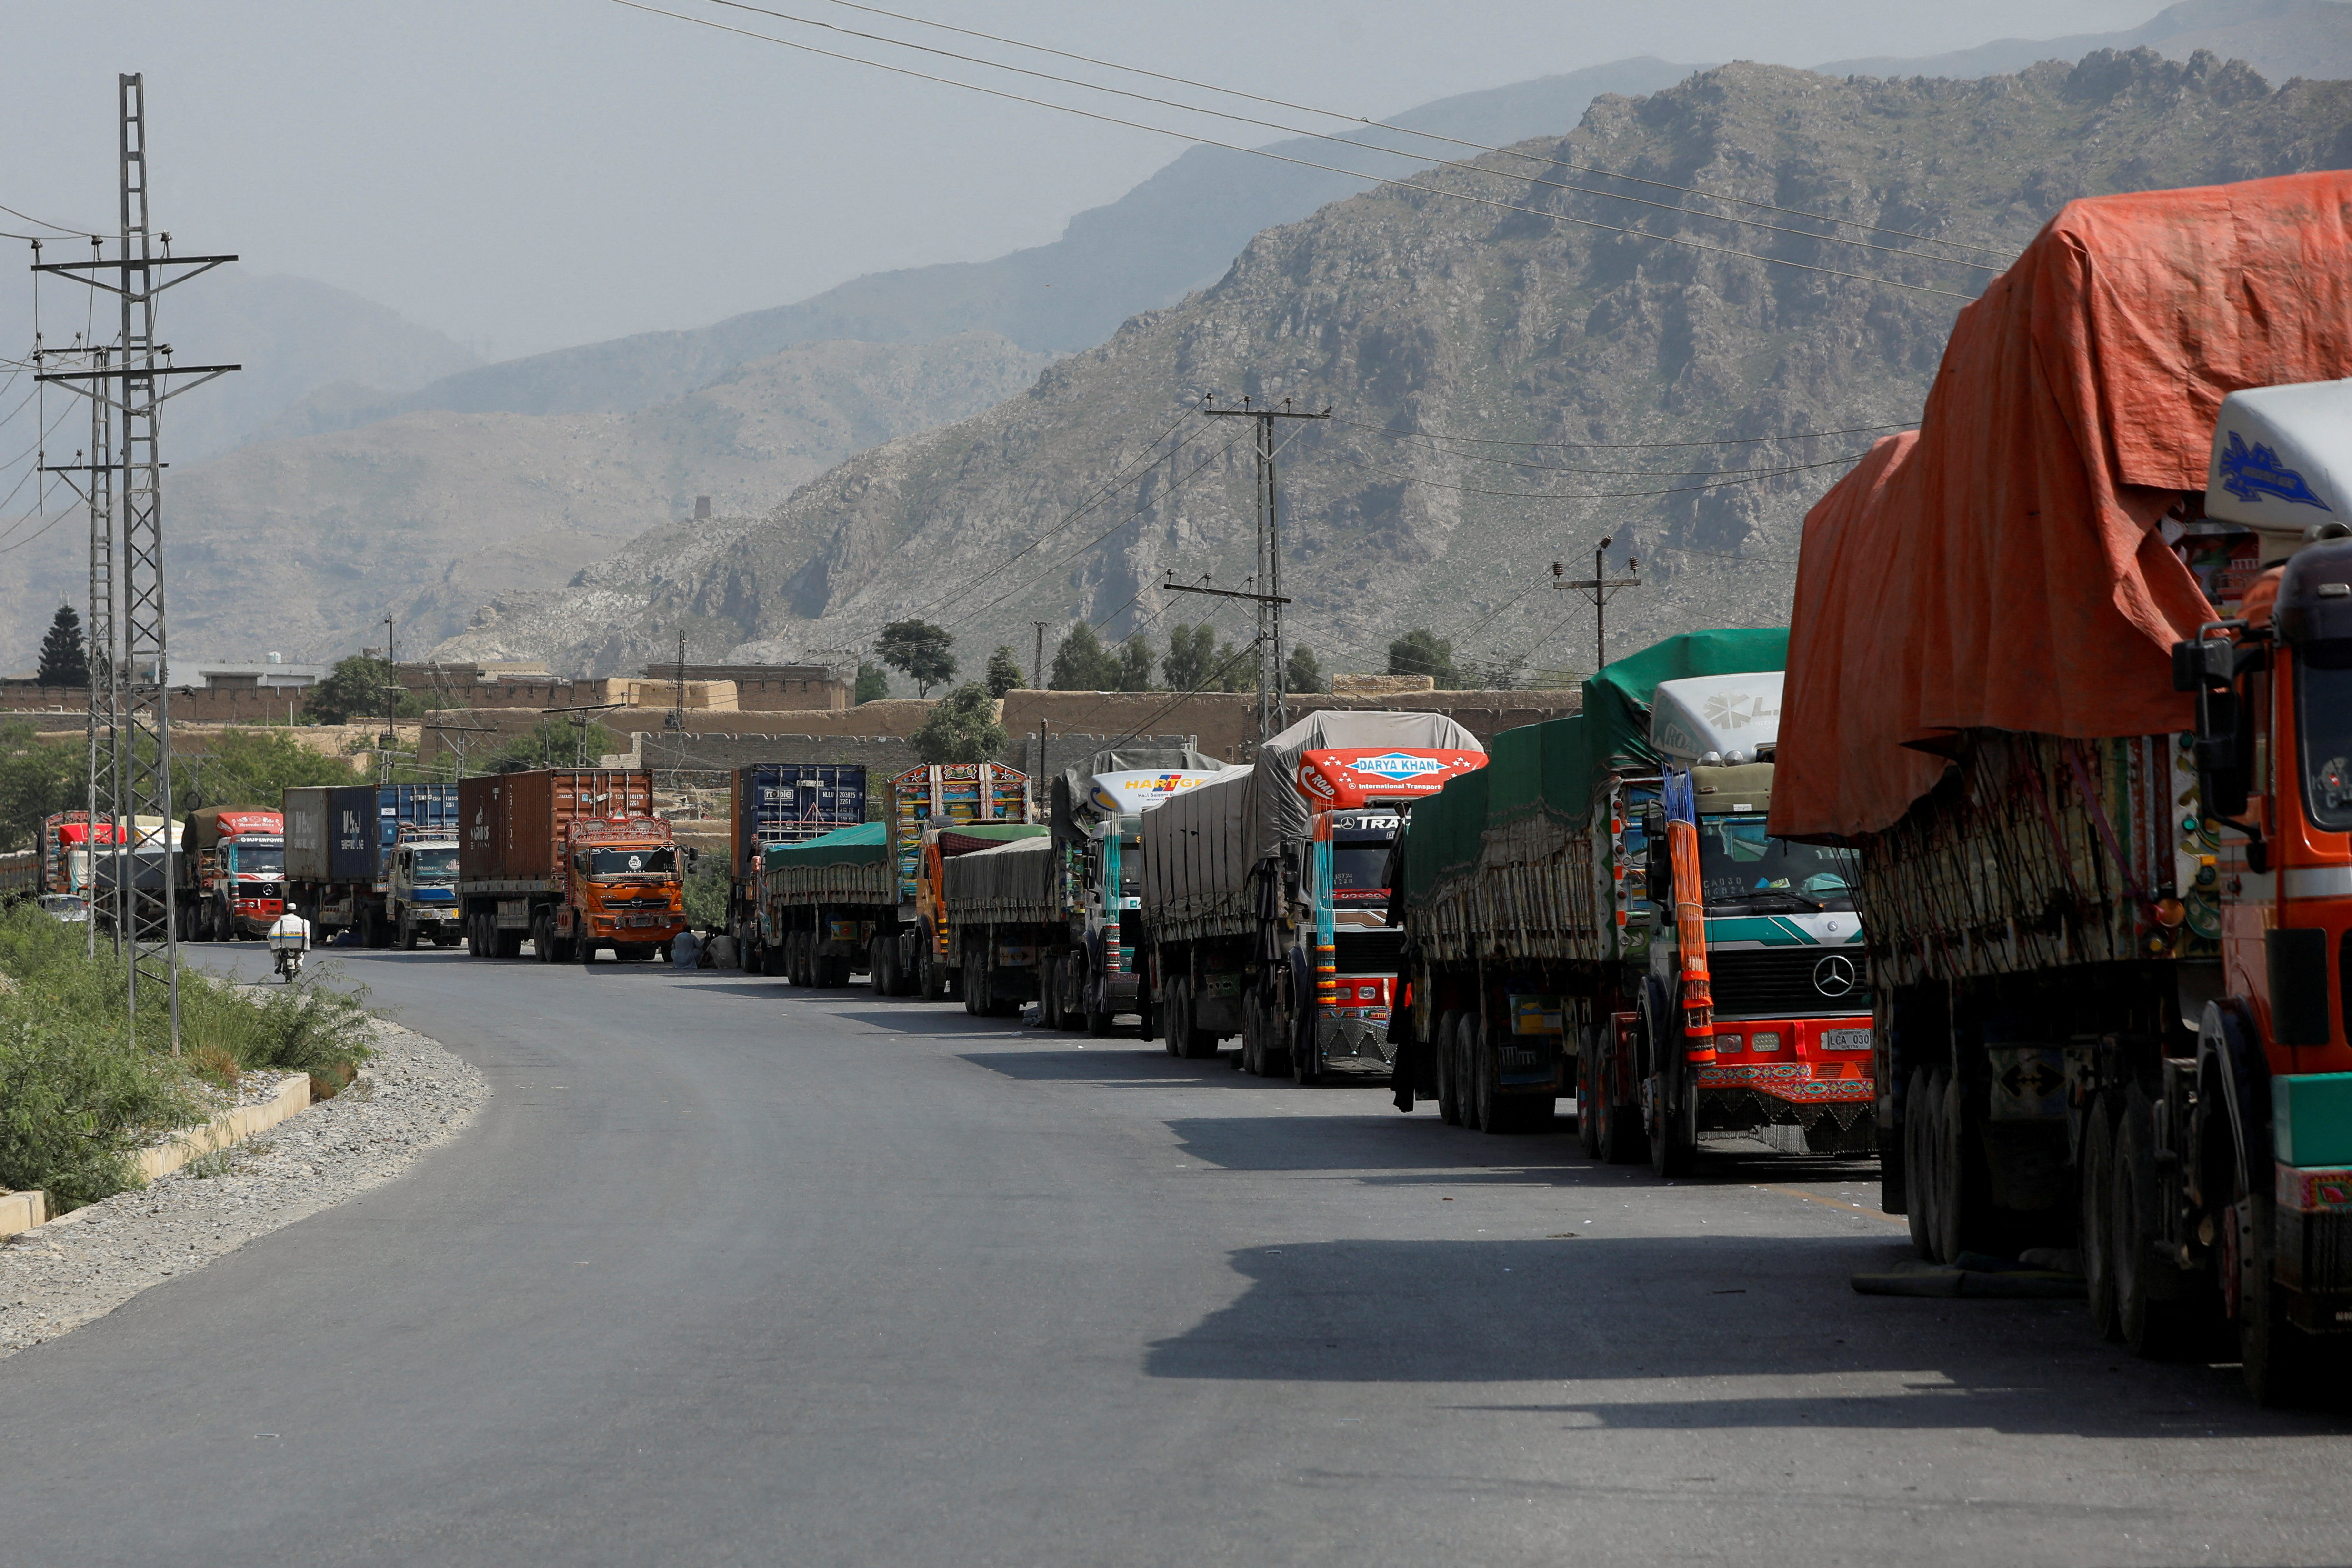 Main Pakistan-Afghan border crossing closed for second day after clashes in Torkham